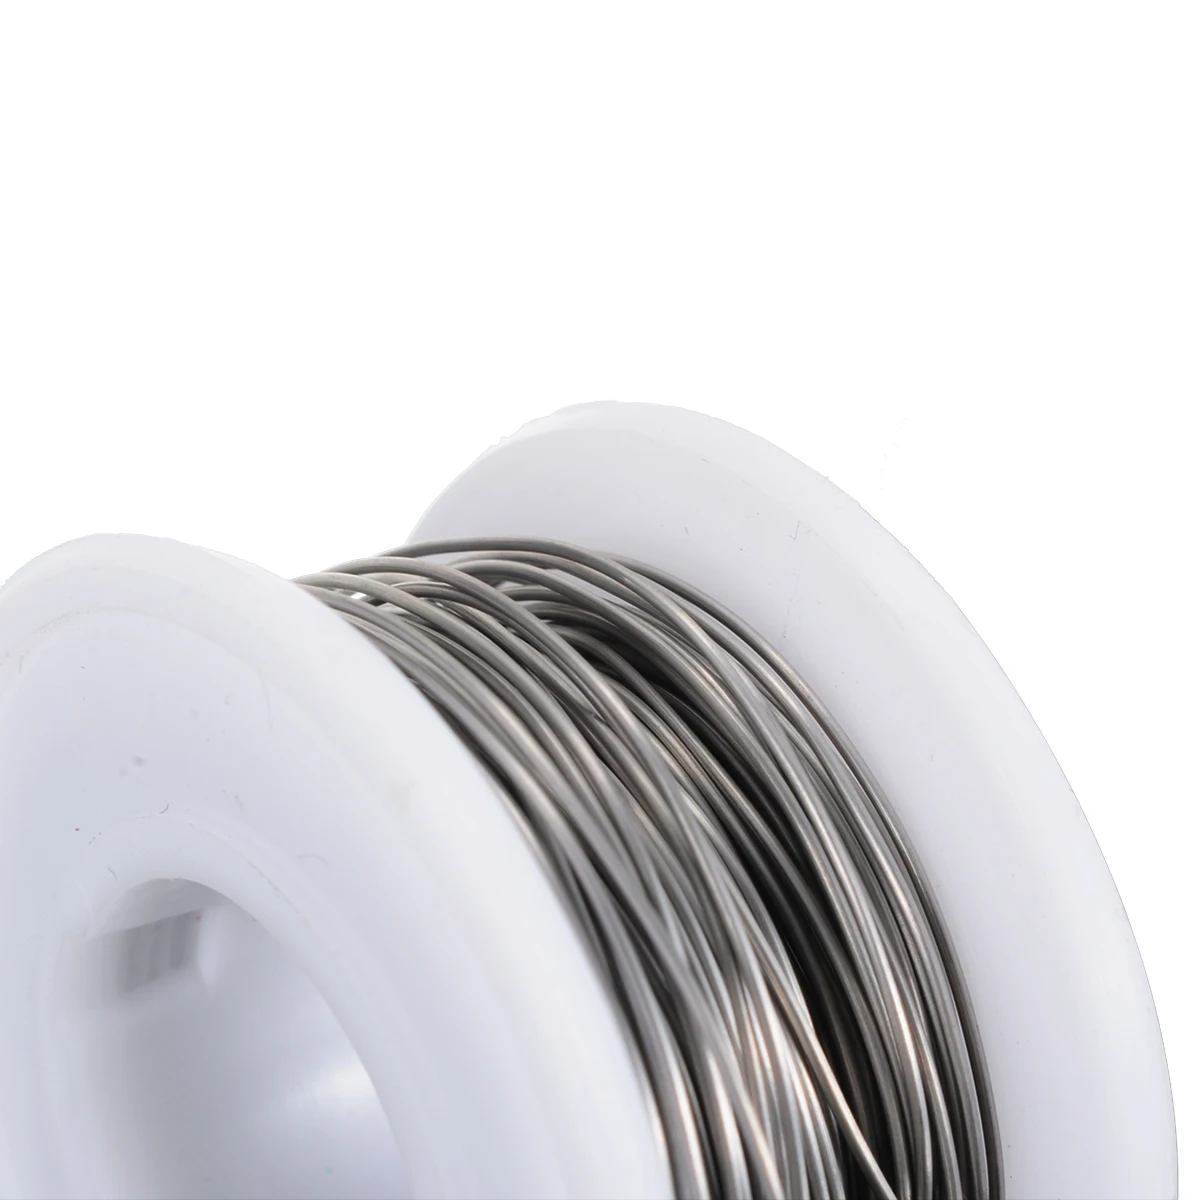 1 Roll 10M Nichrome Wire 0.5mm Diam Cr20Ni80 Heating Wire Resistance Wires Industry Supplies